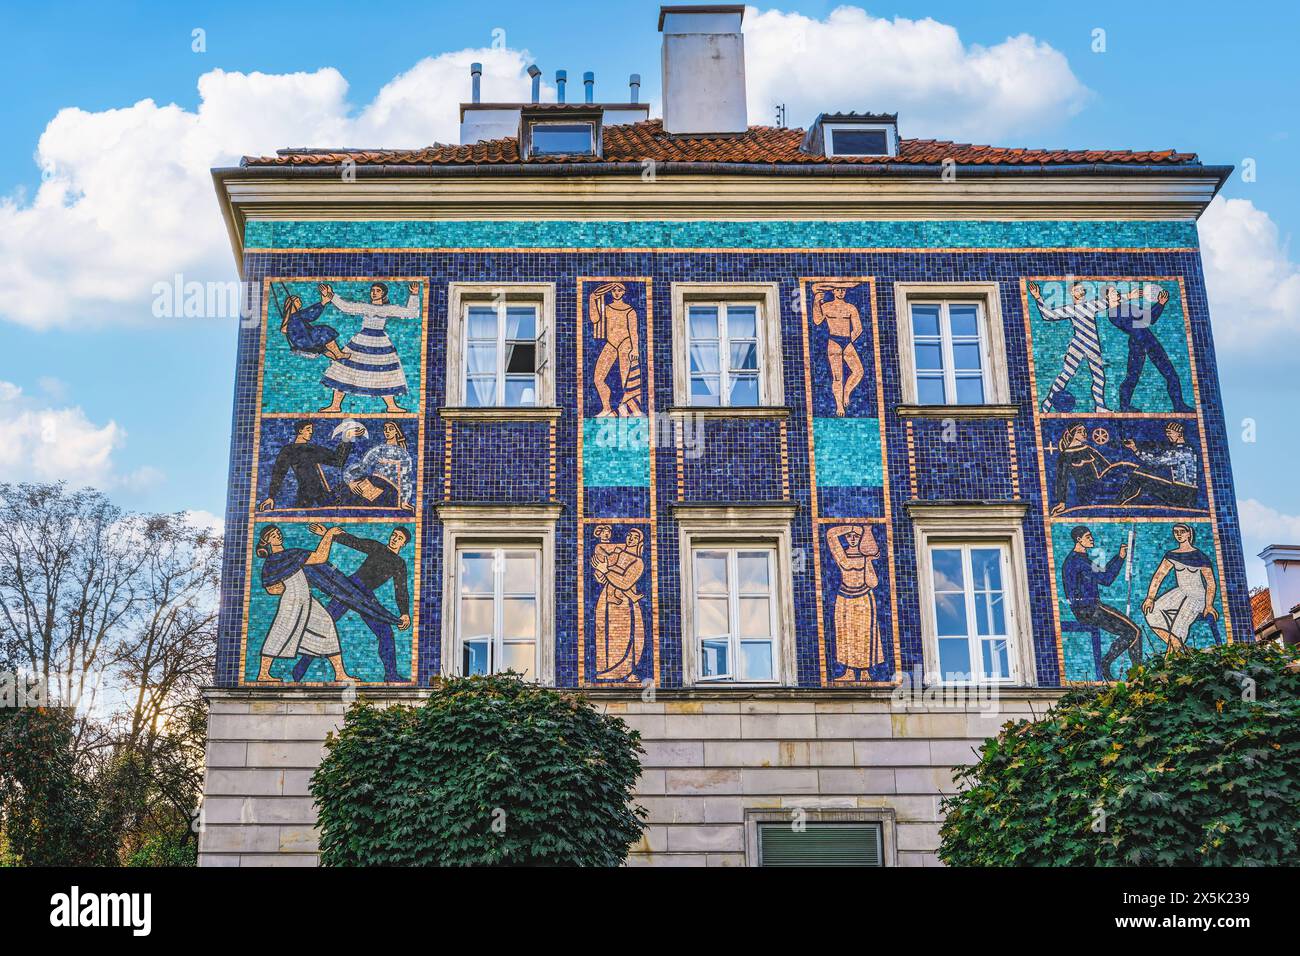 Day low angle view of a traditional roof tiled house decorated with vivid color mosaics depicting human figures in the Old Town, Warsaw, Poland, Europ Stock Photo